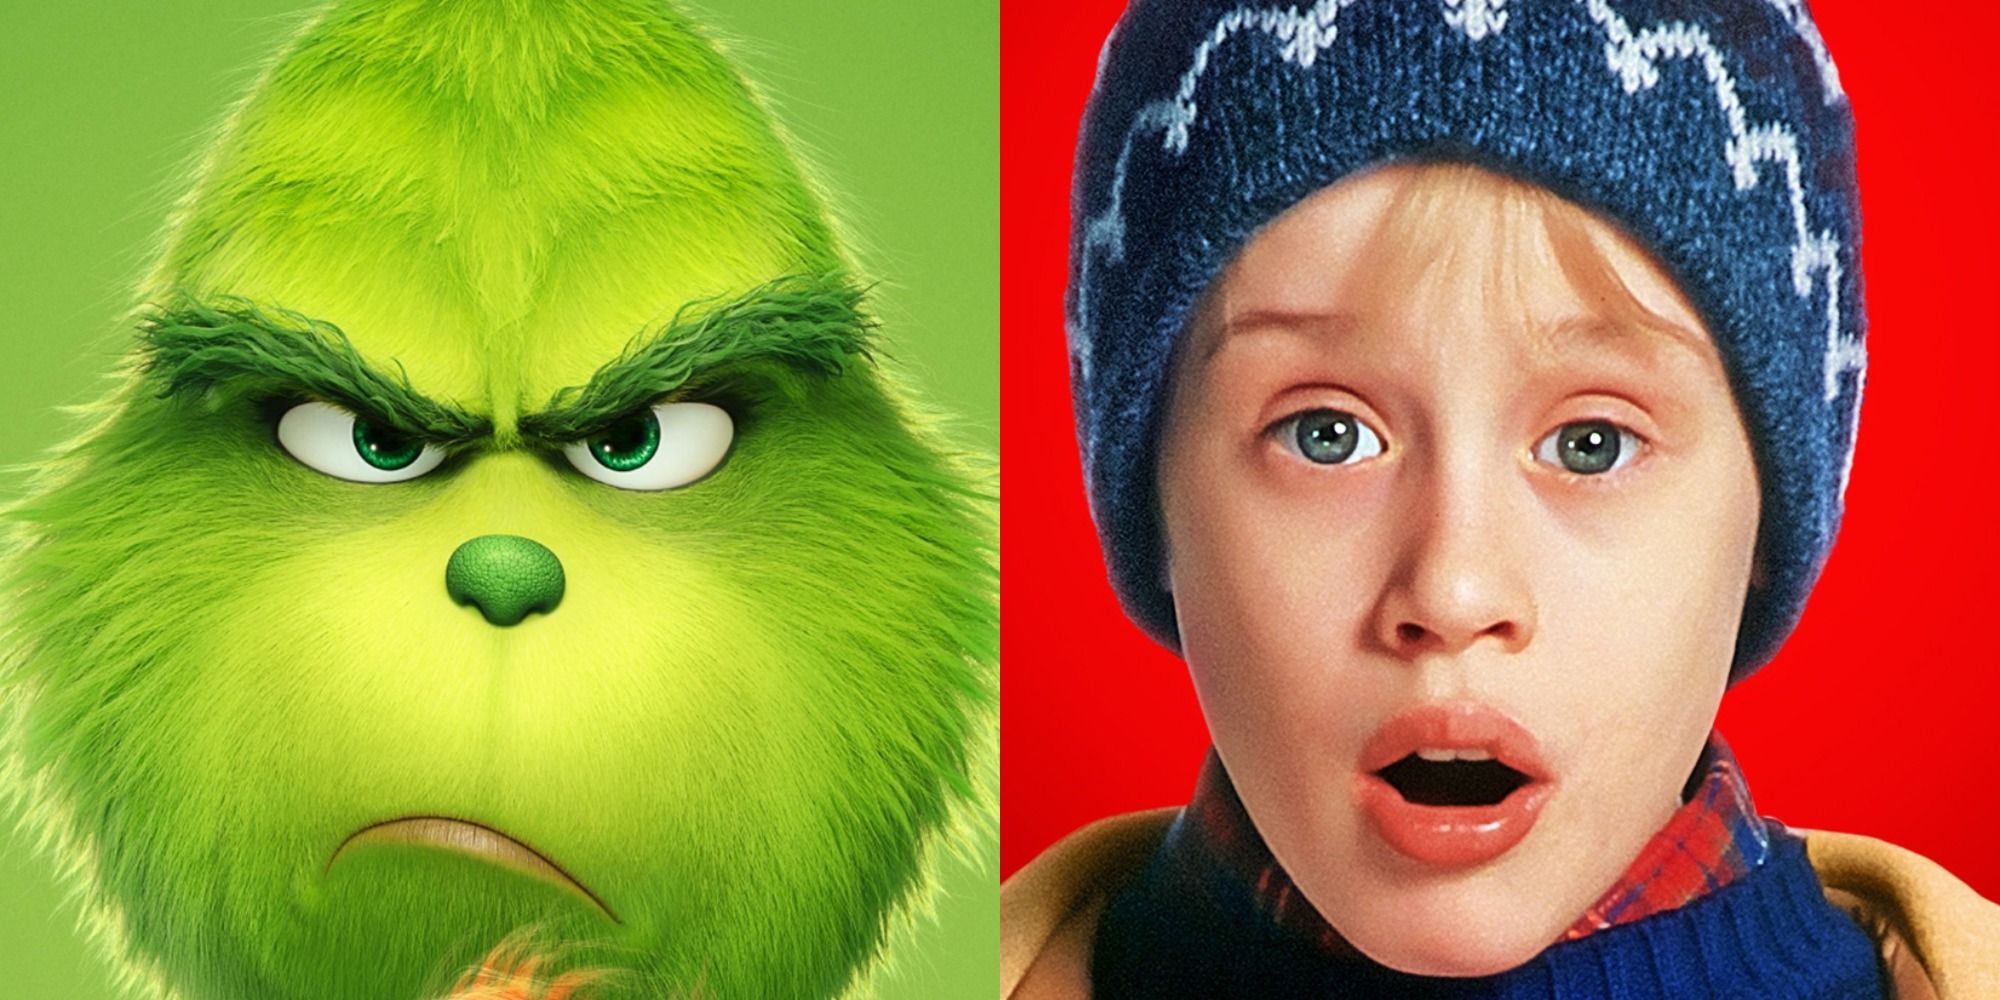 Split image of the animated Grinch and Macauley Culkin in Home Alone